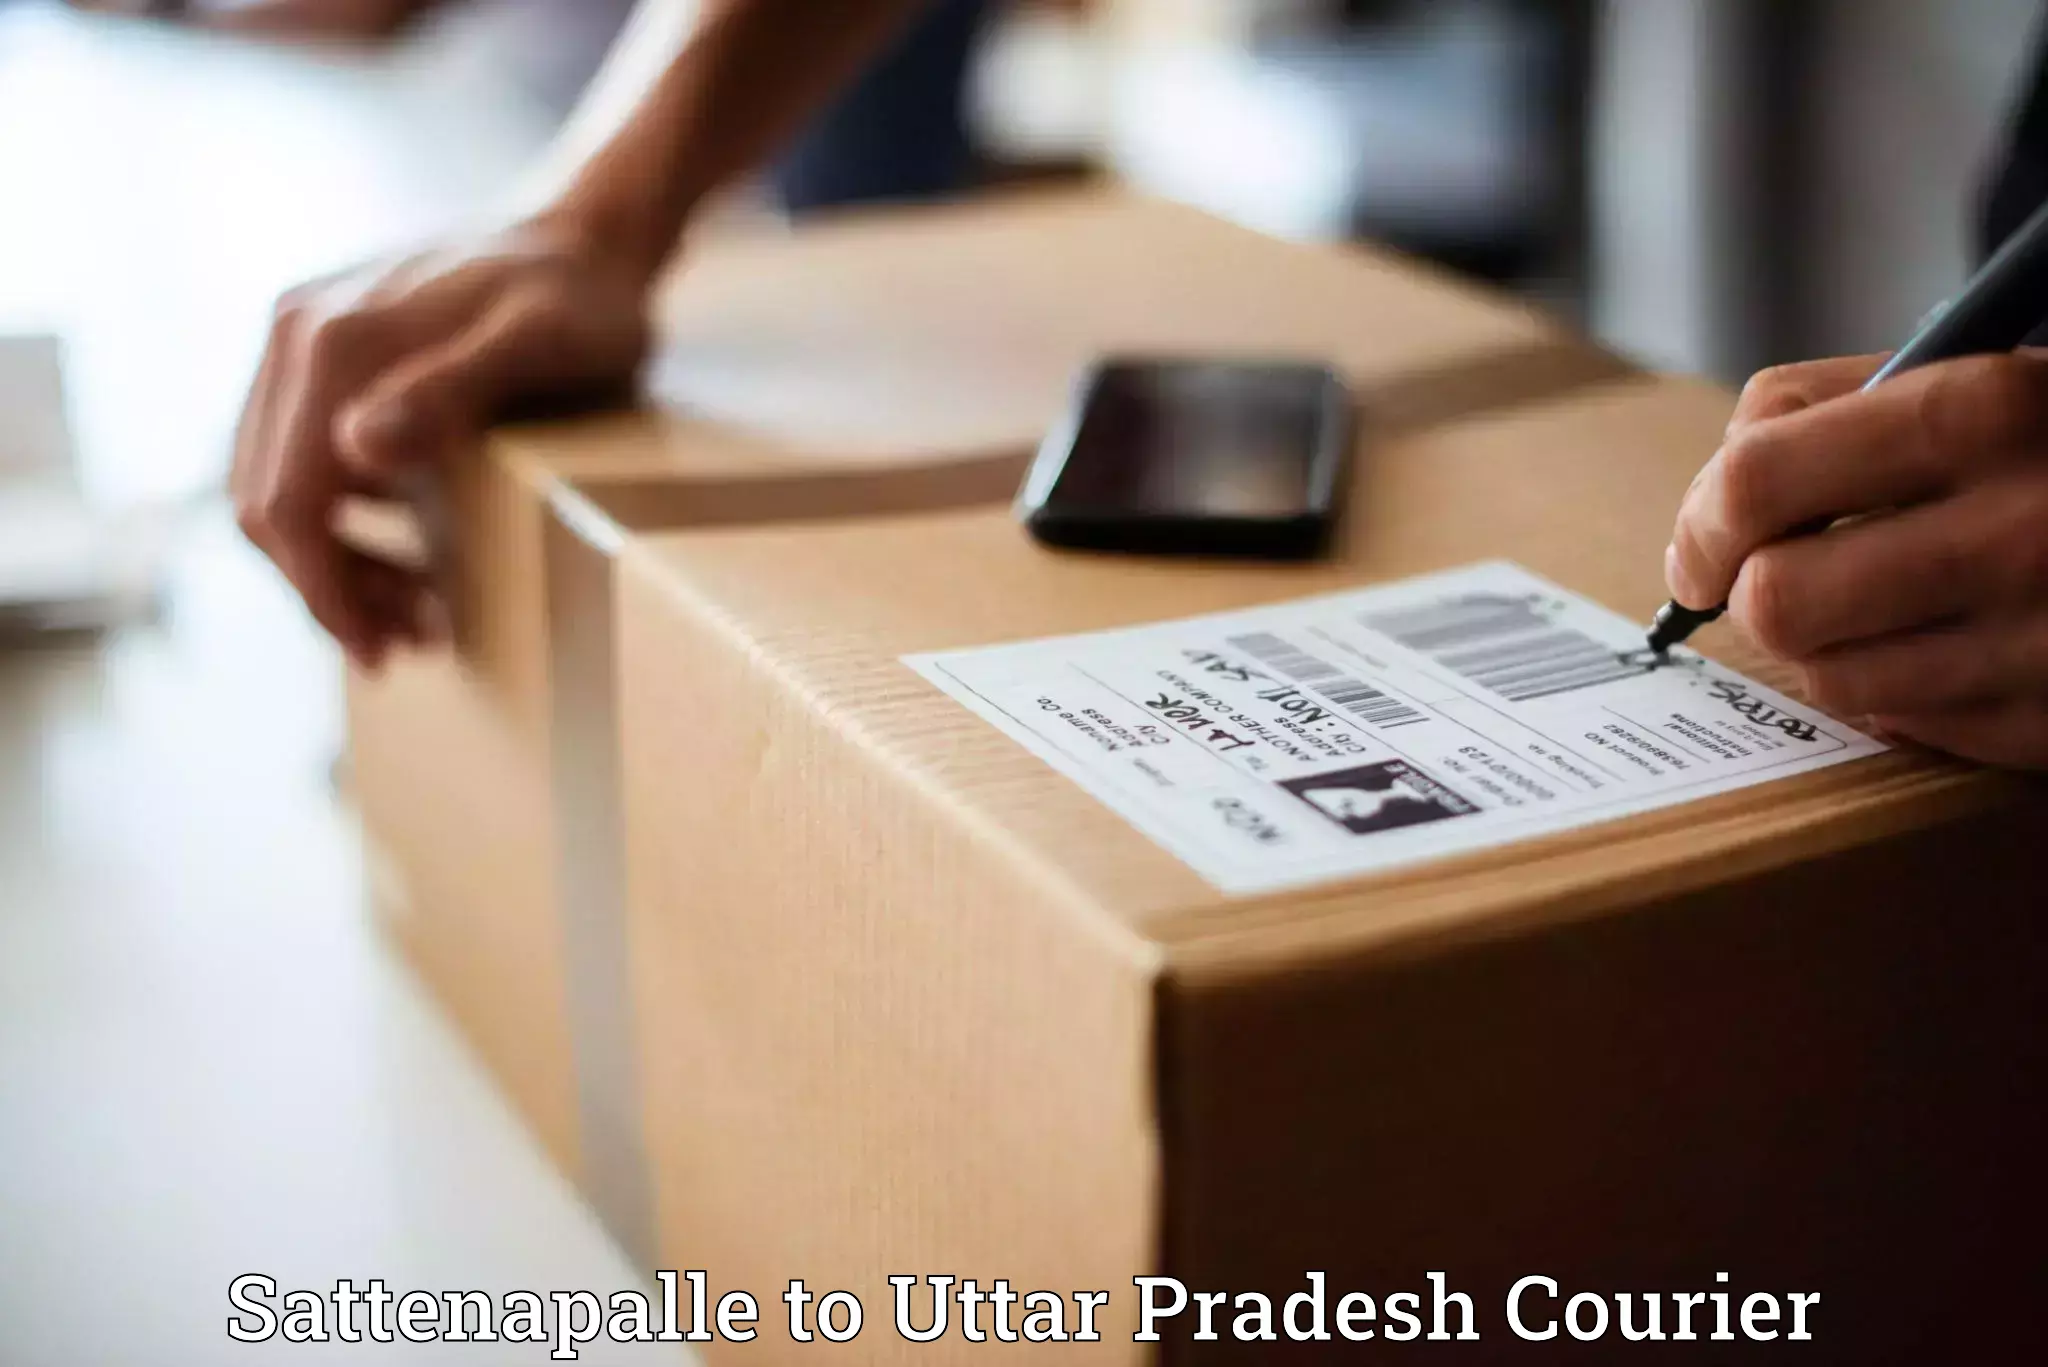 Bulk courier orders Sattenapalle to Bhadohi